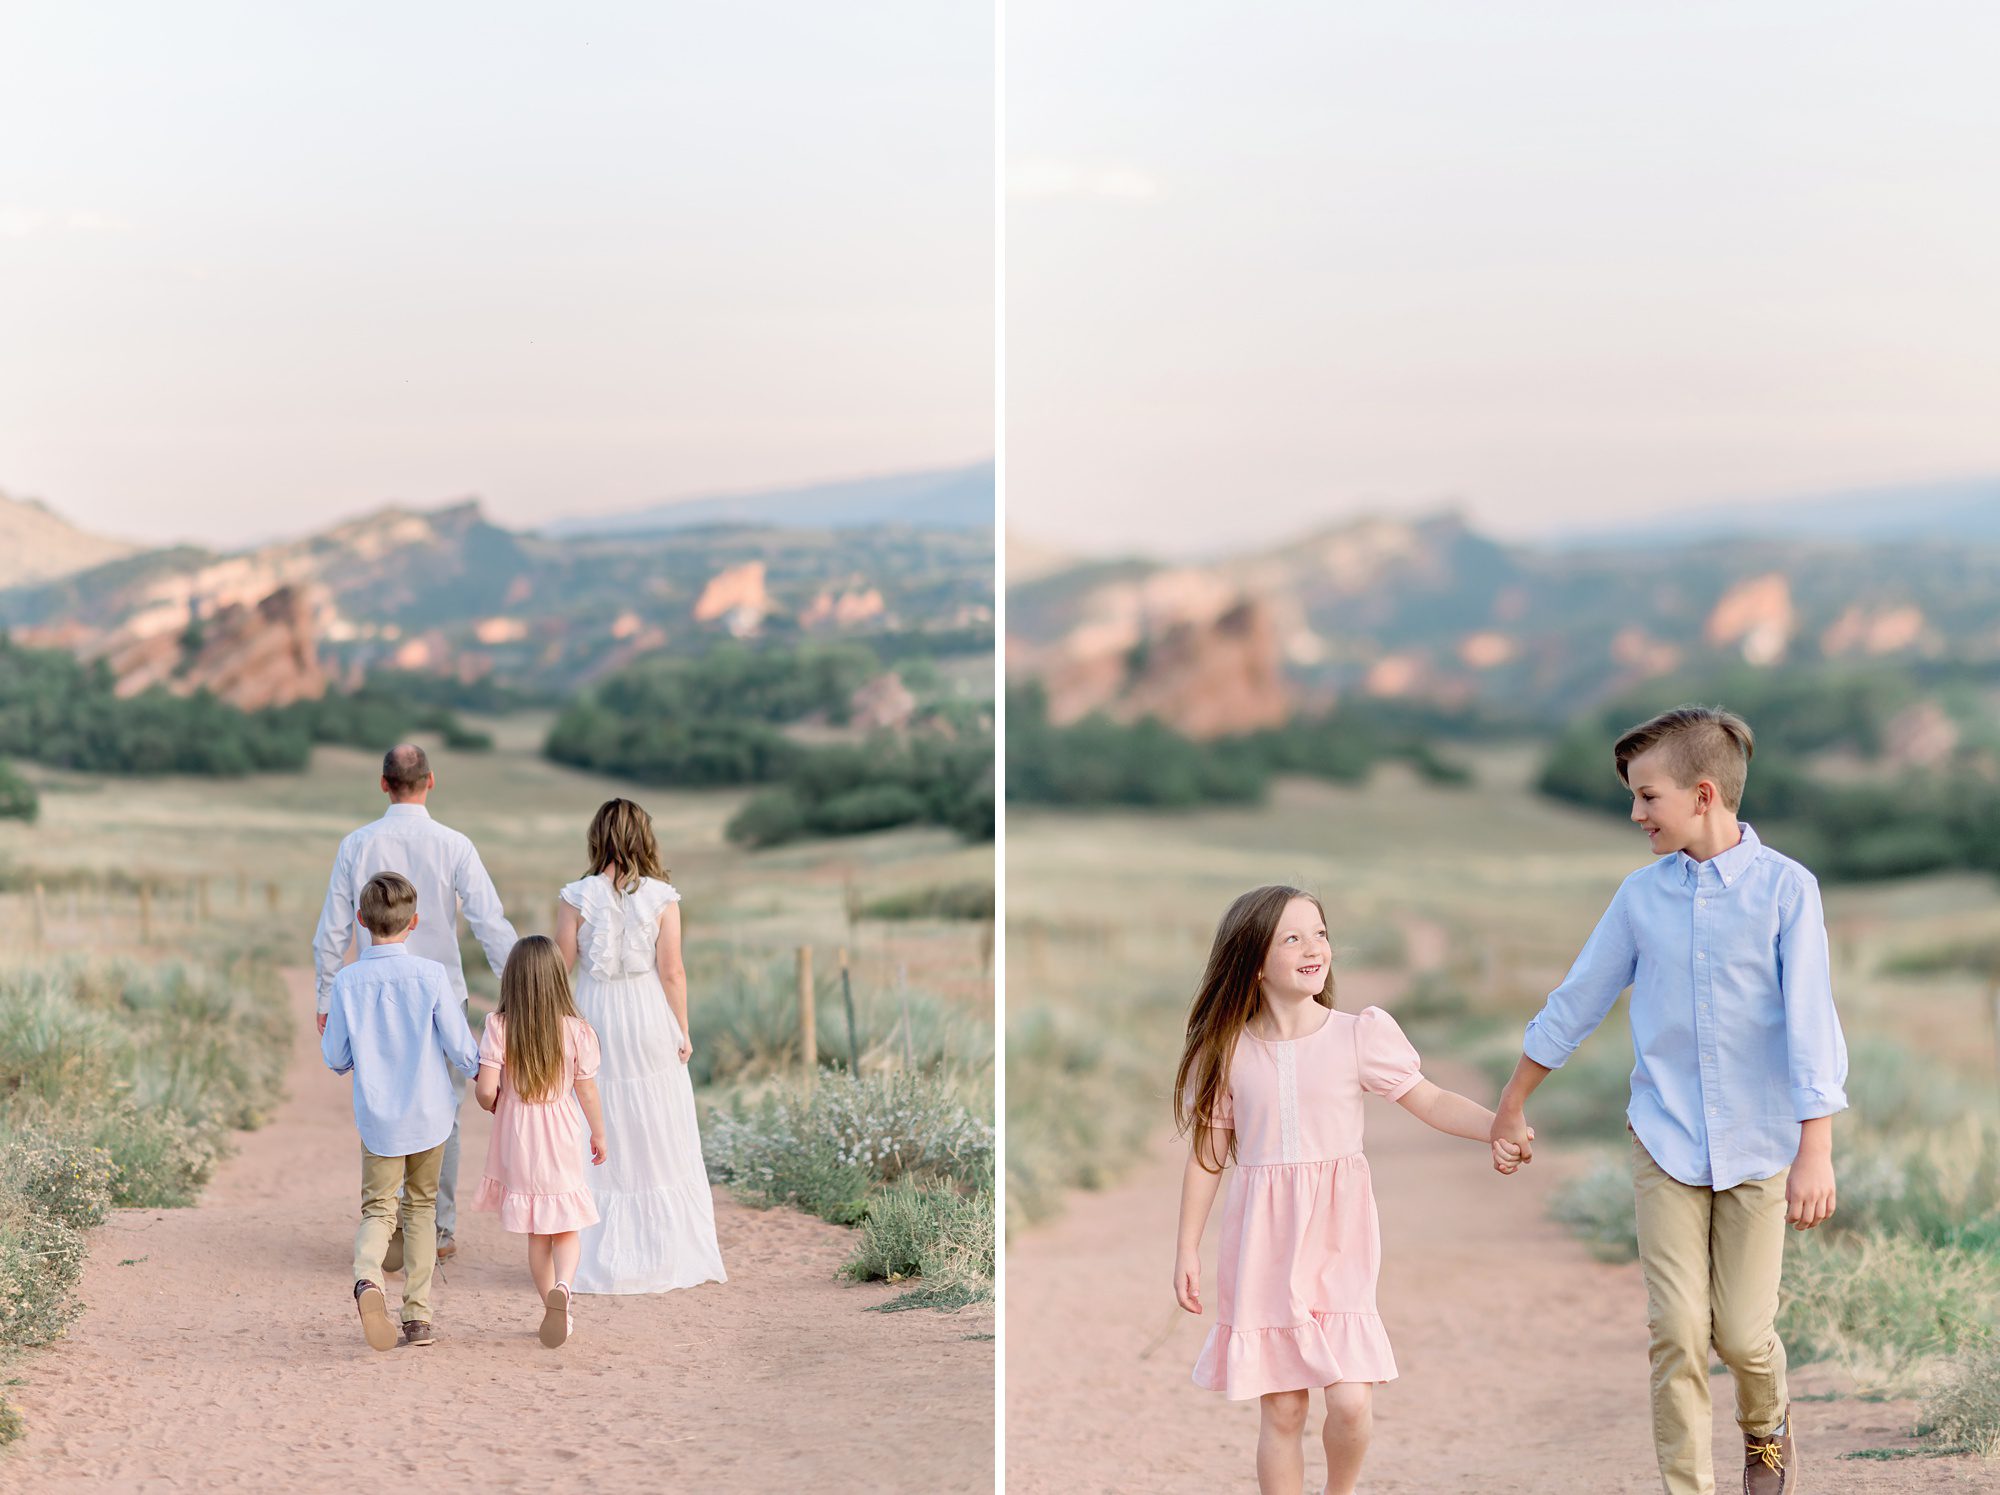 A series of images from fall family photos in Denver Colorado.